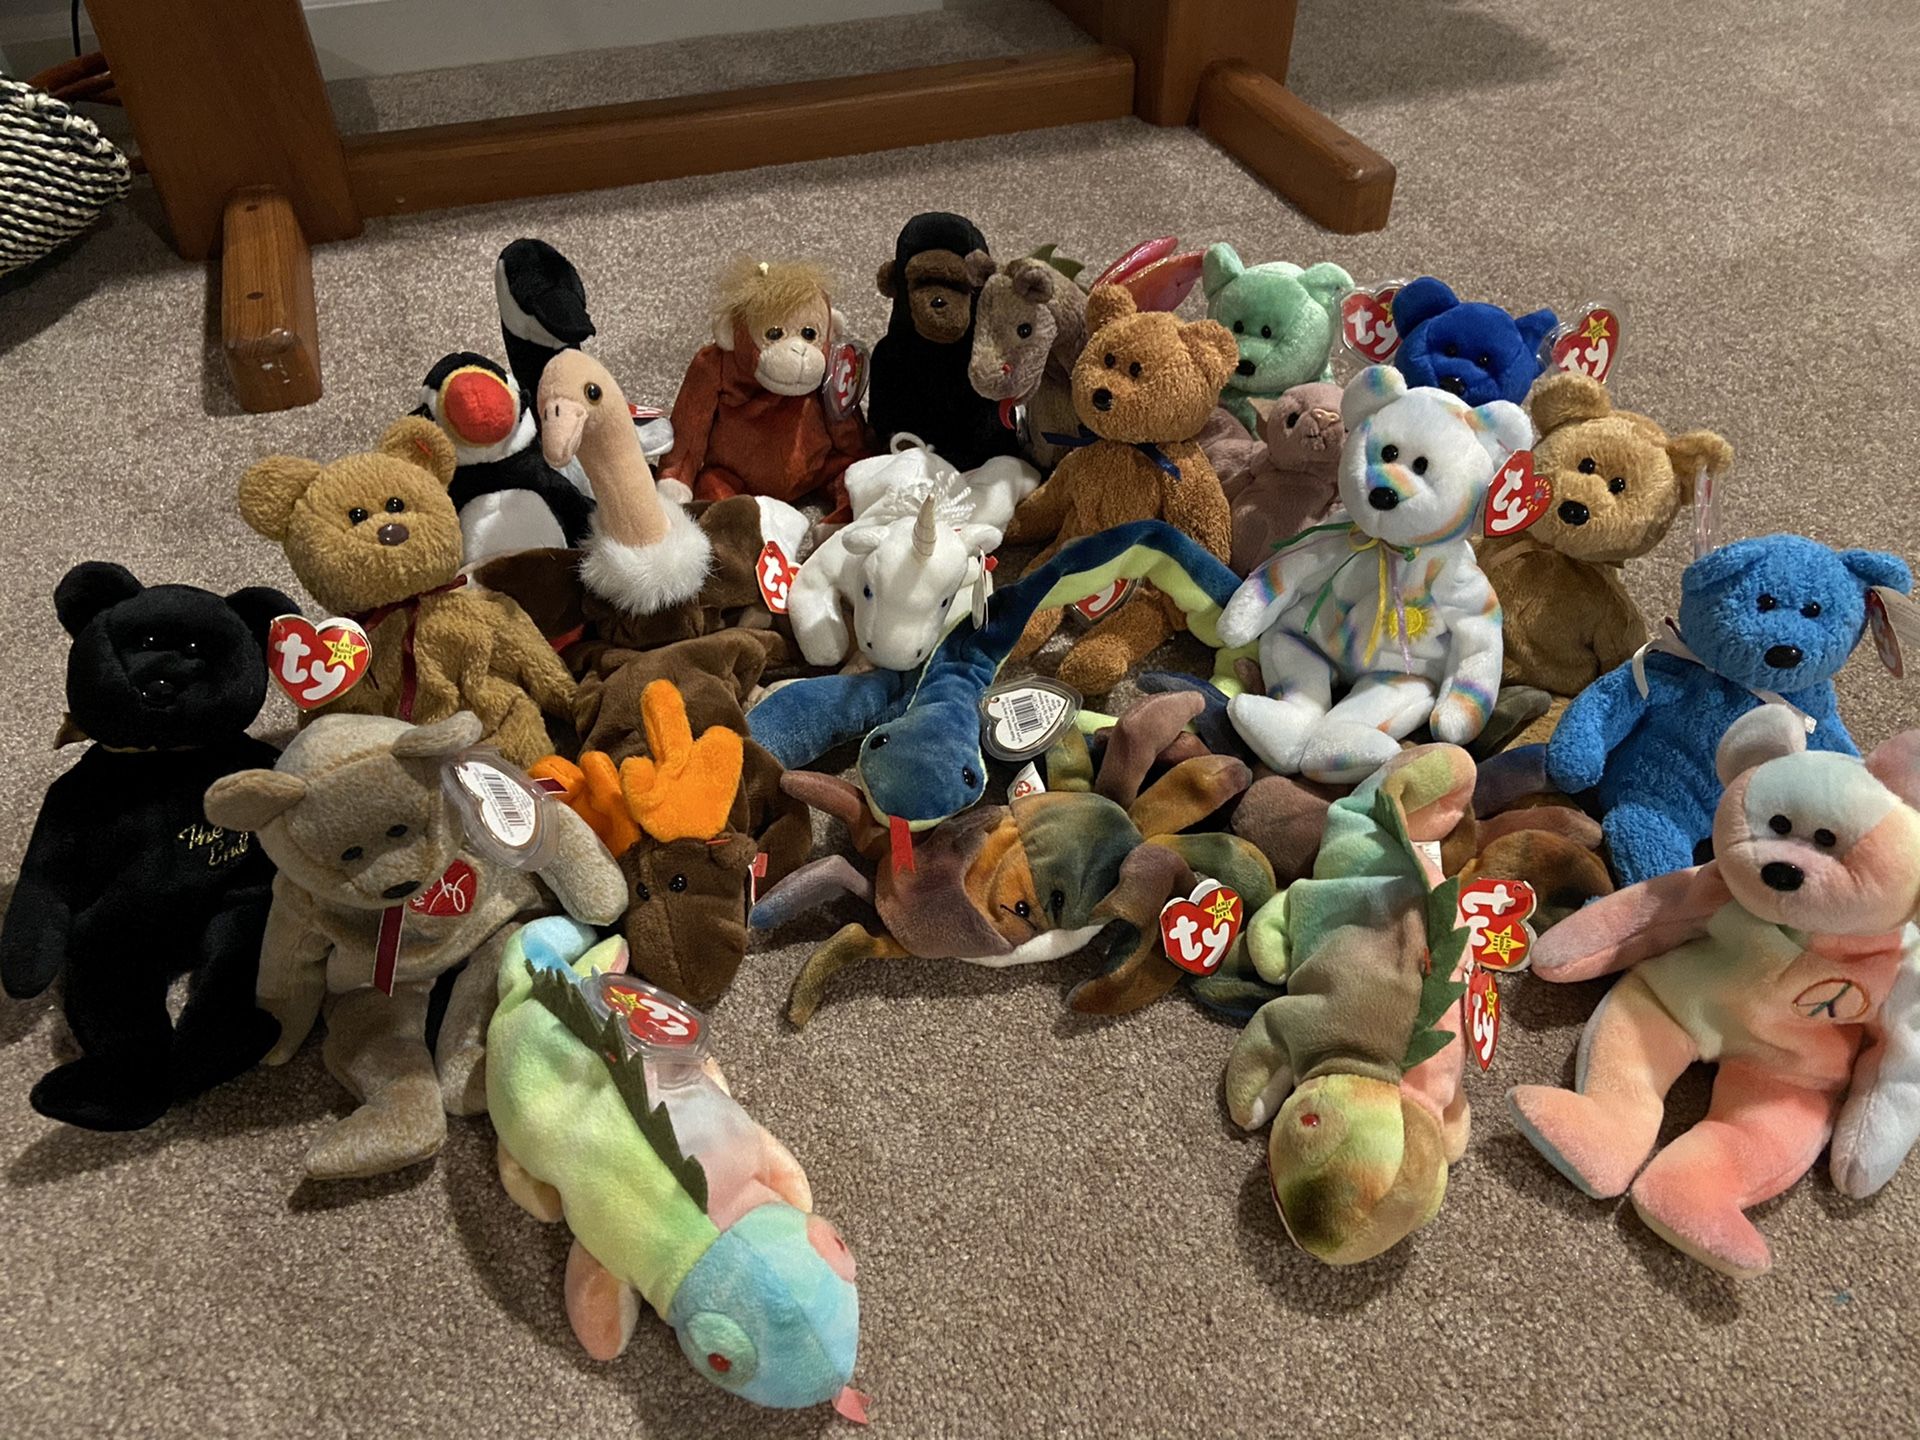 Over 25 miscellaneous beanie babies